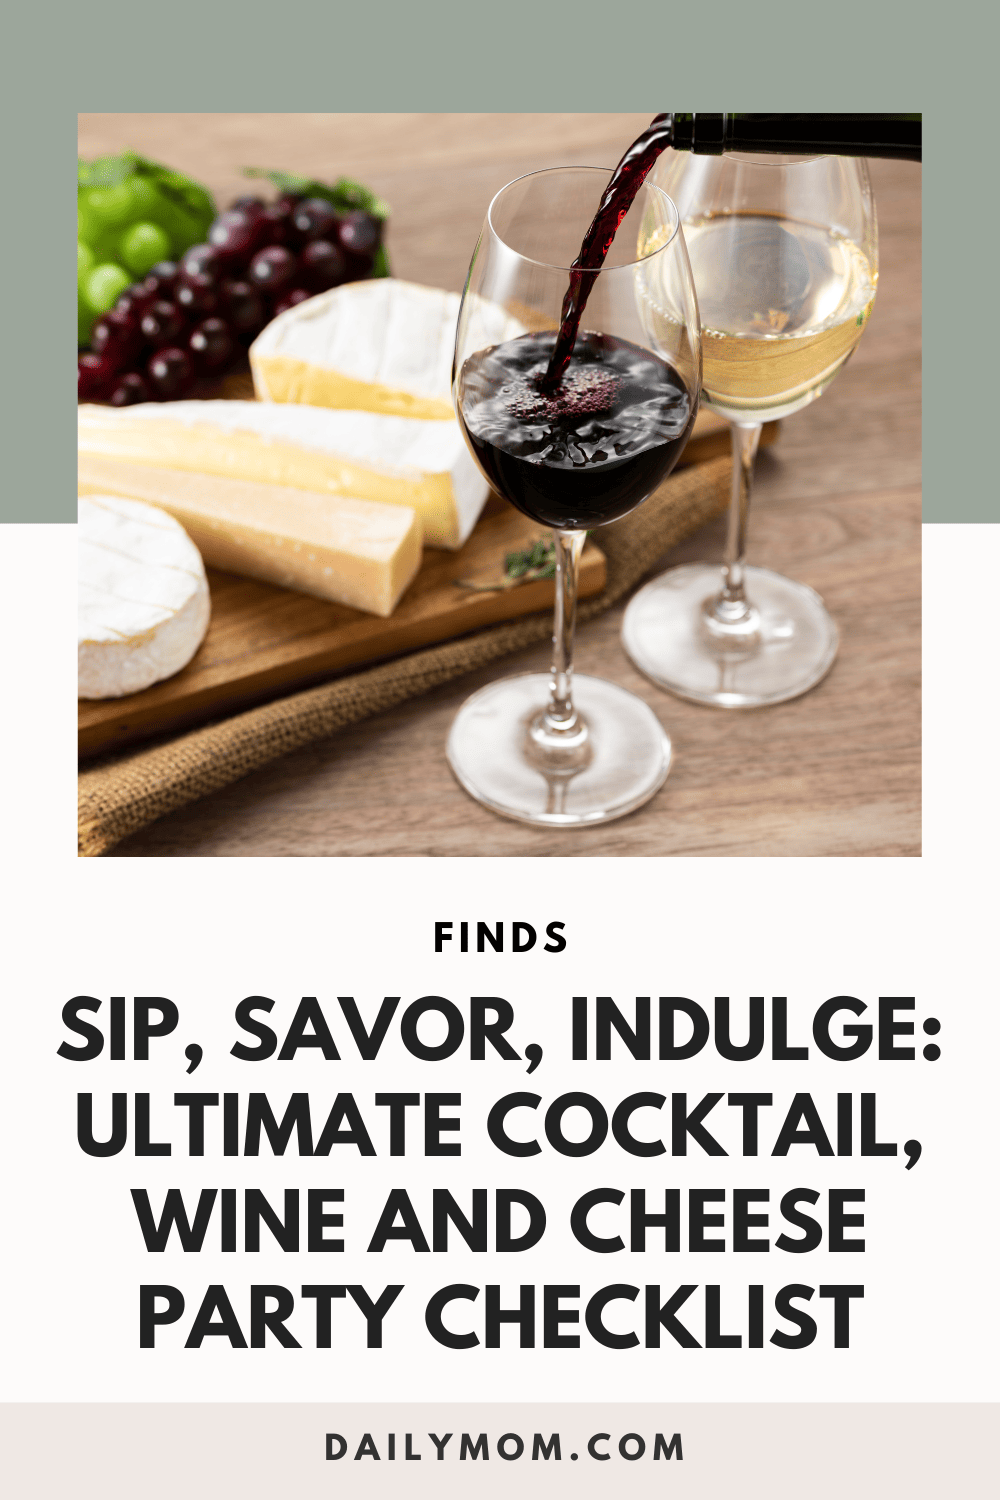 Daily Mom parent portal wine and cheese